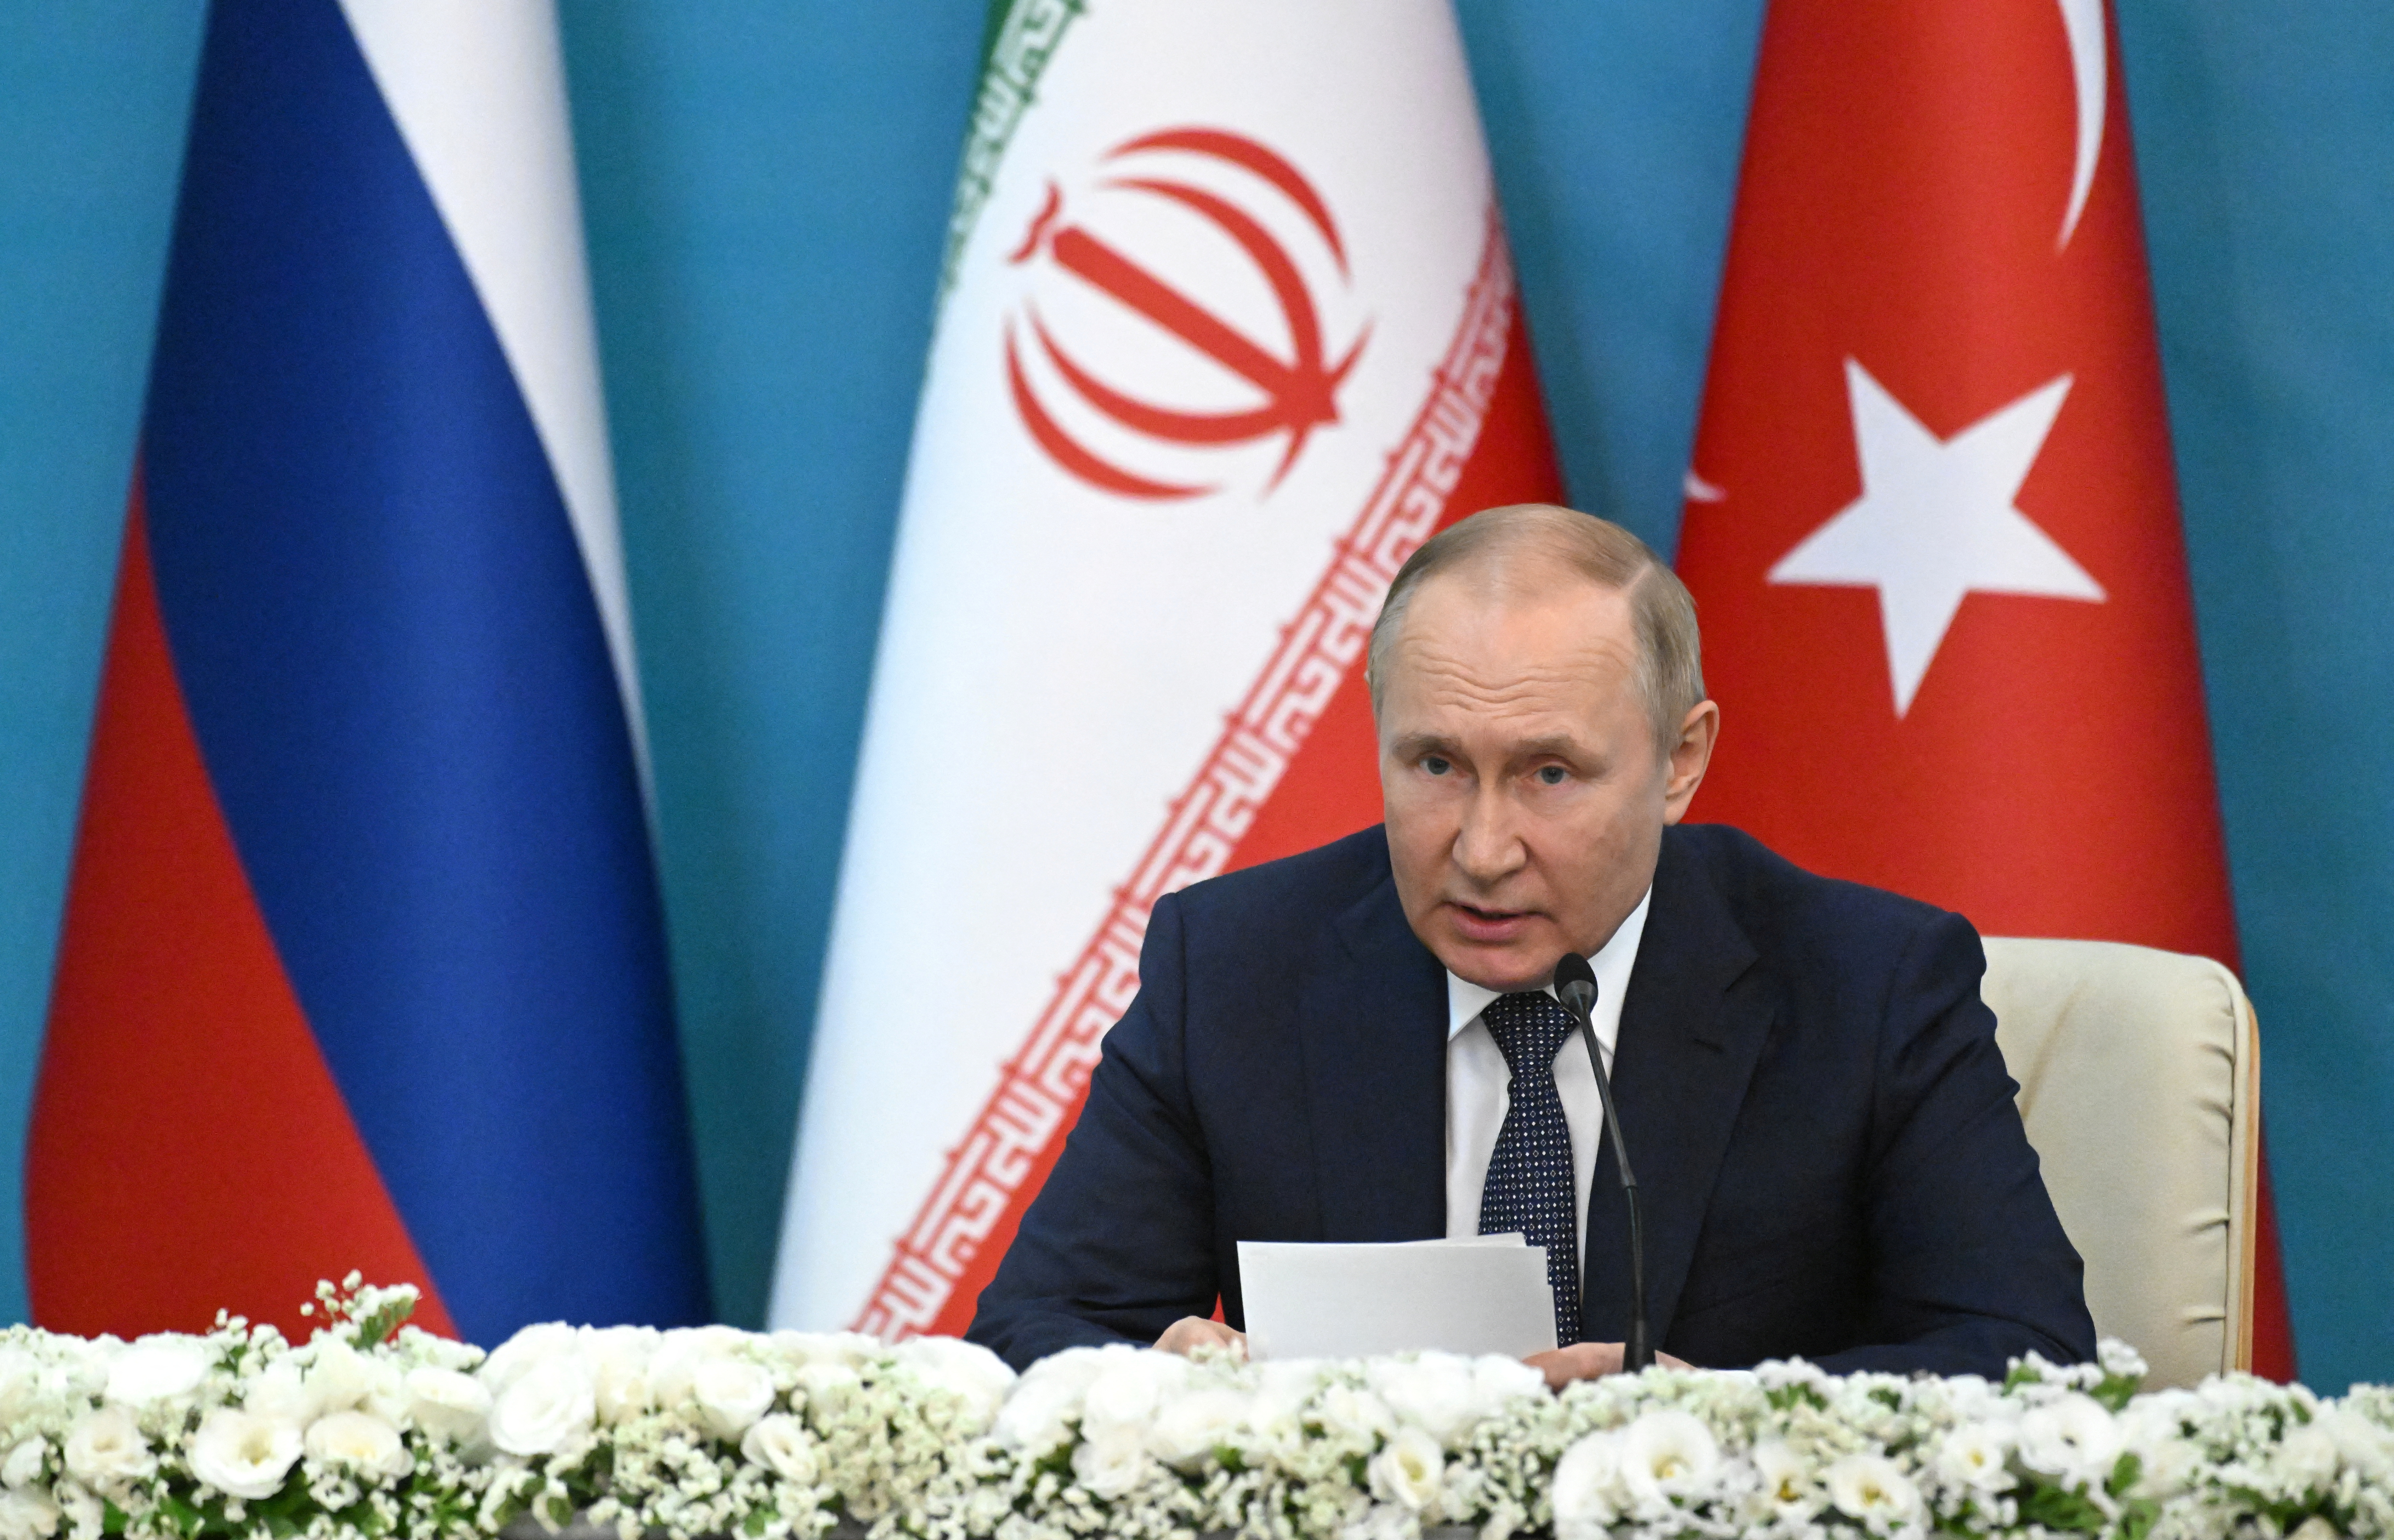 Russian President Putin attends a news conference in Tehran